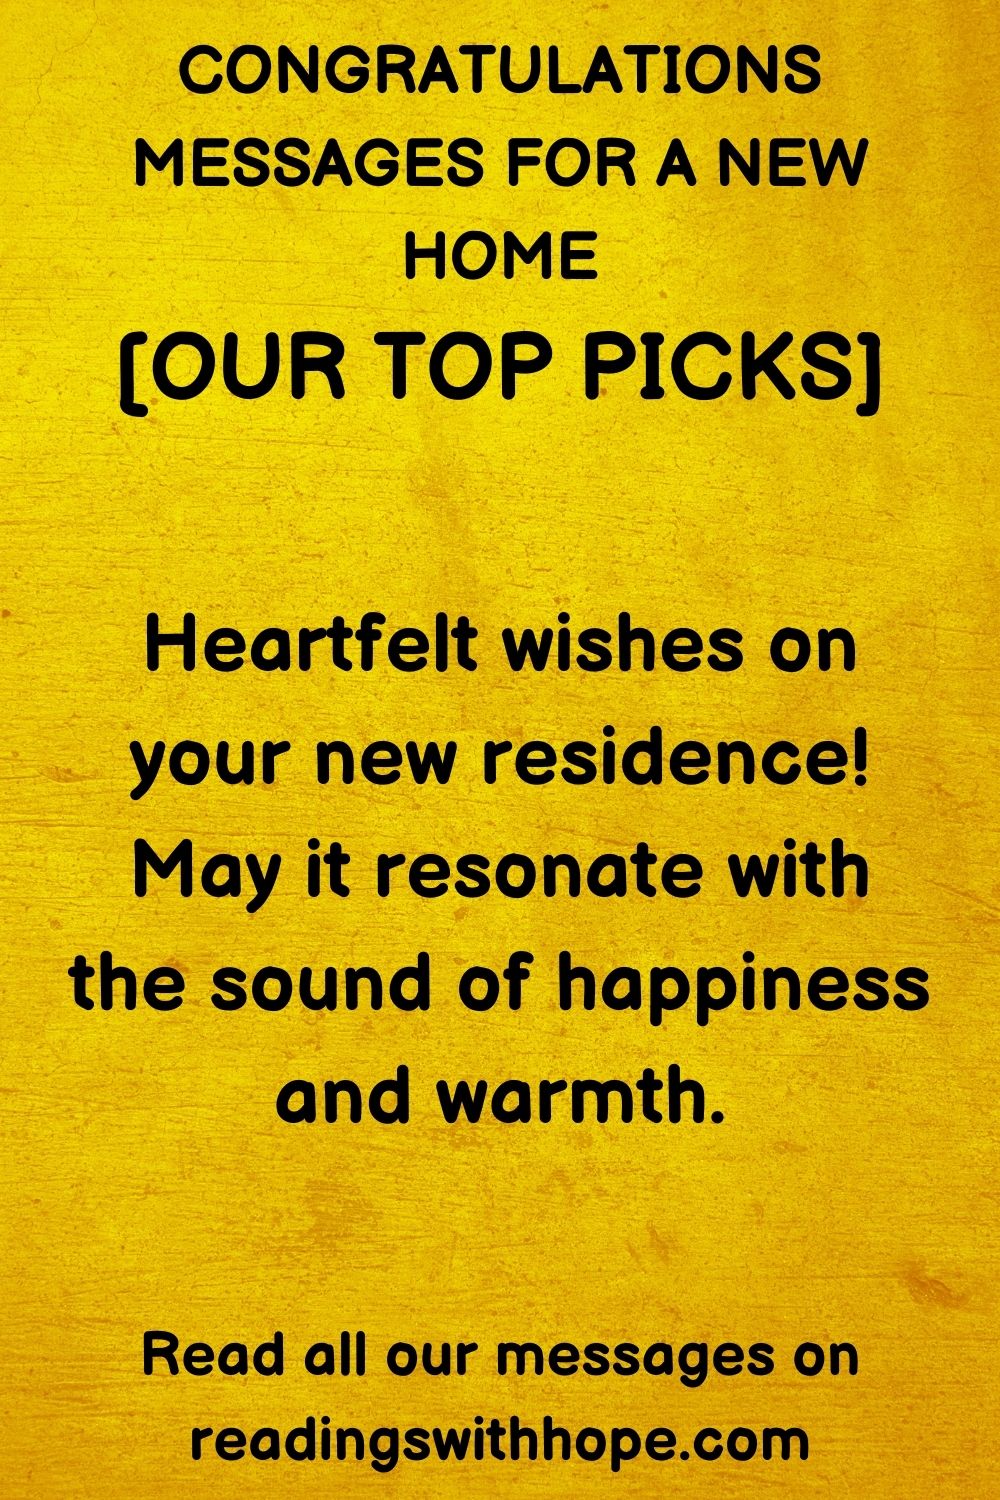 congratulations message for a new home that says Heartfelt wishes on your new residence! May it resonate with the sound of happiness and warmth.